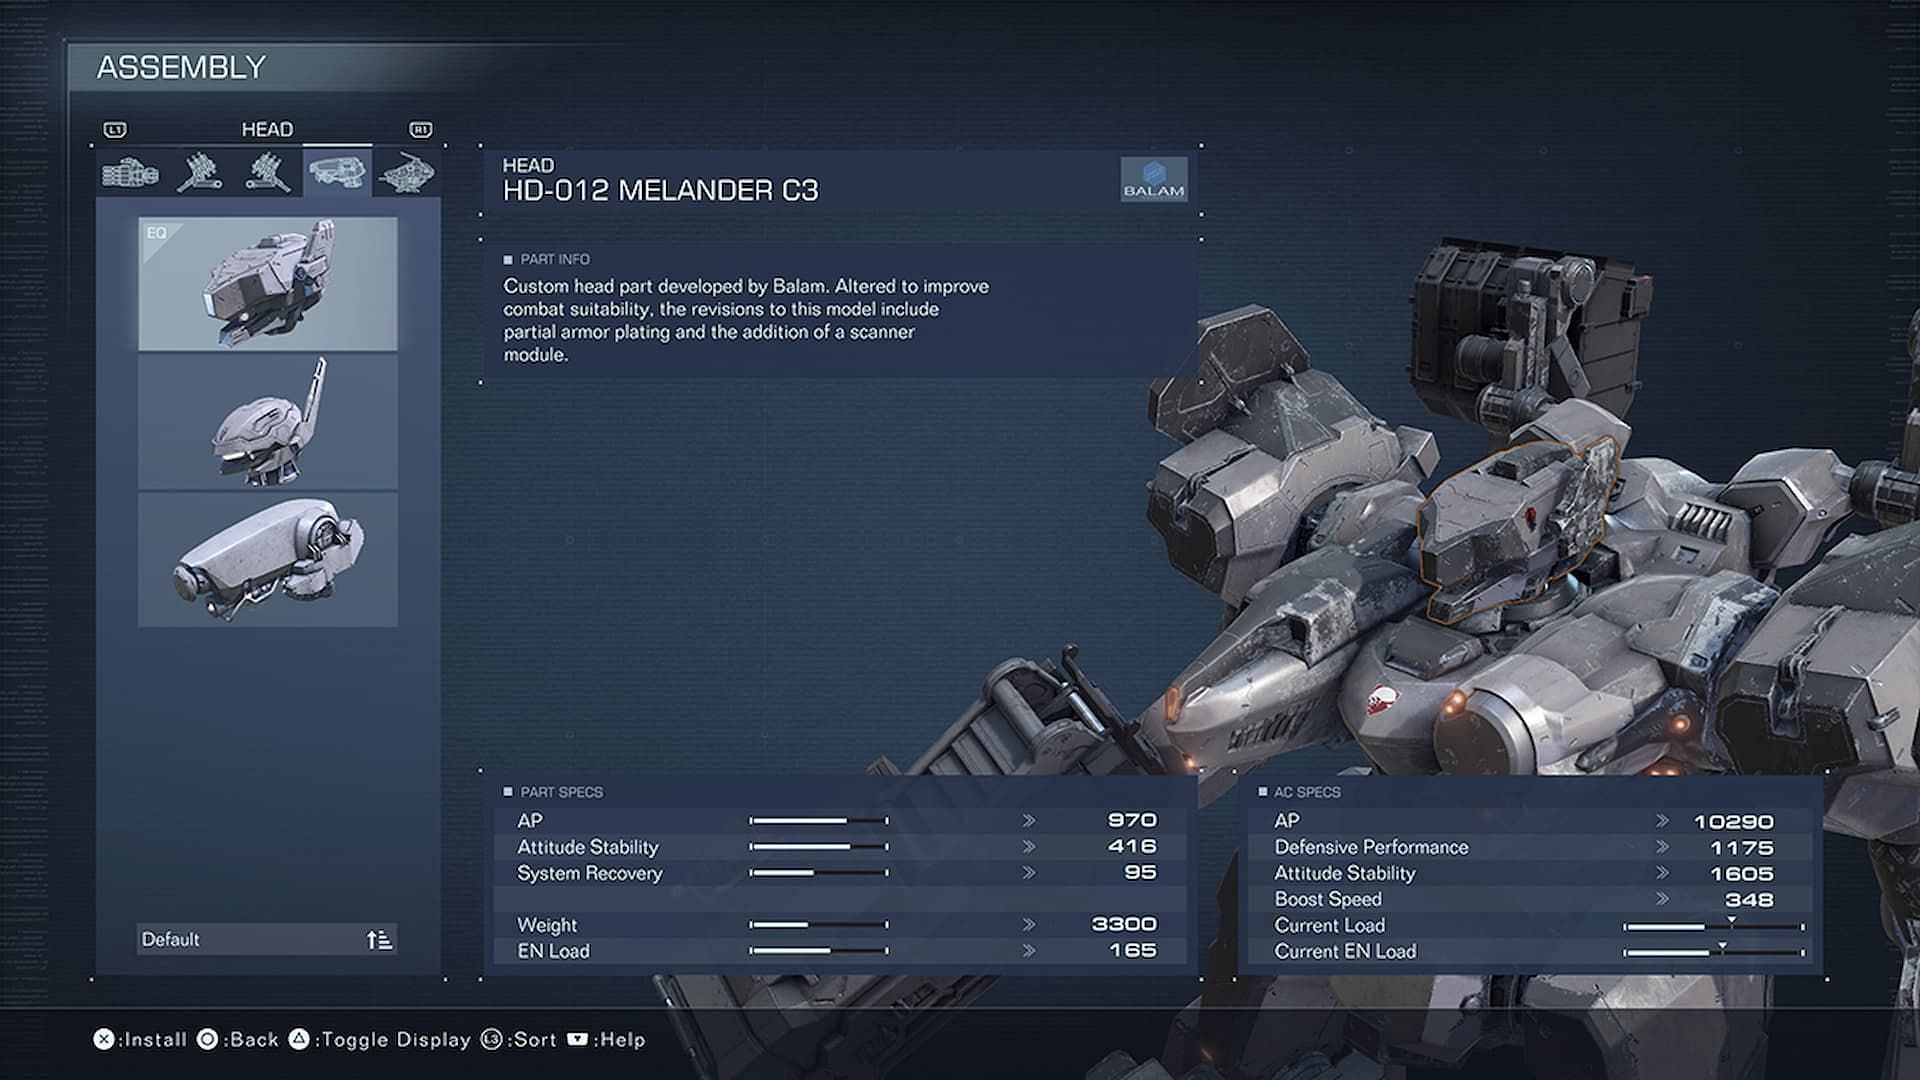 MELANDER C3 is a perfect head choice for this Armored Core 6 tank build (Image via FromSoftware)